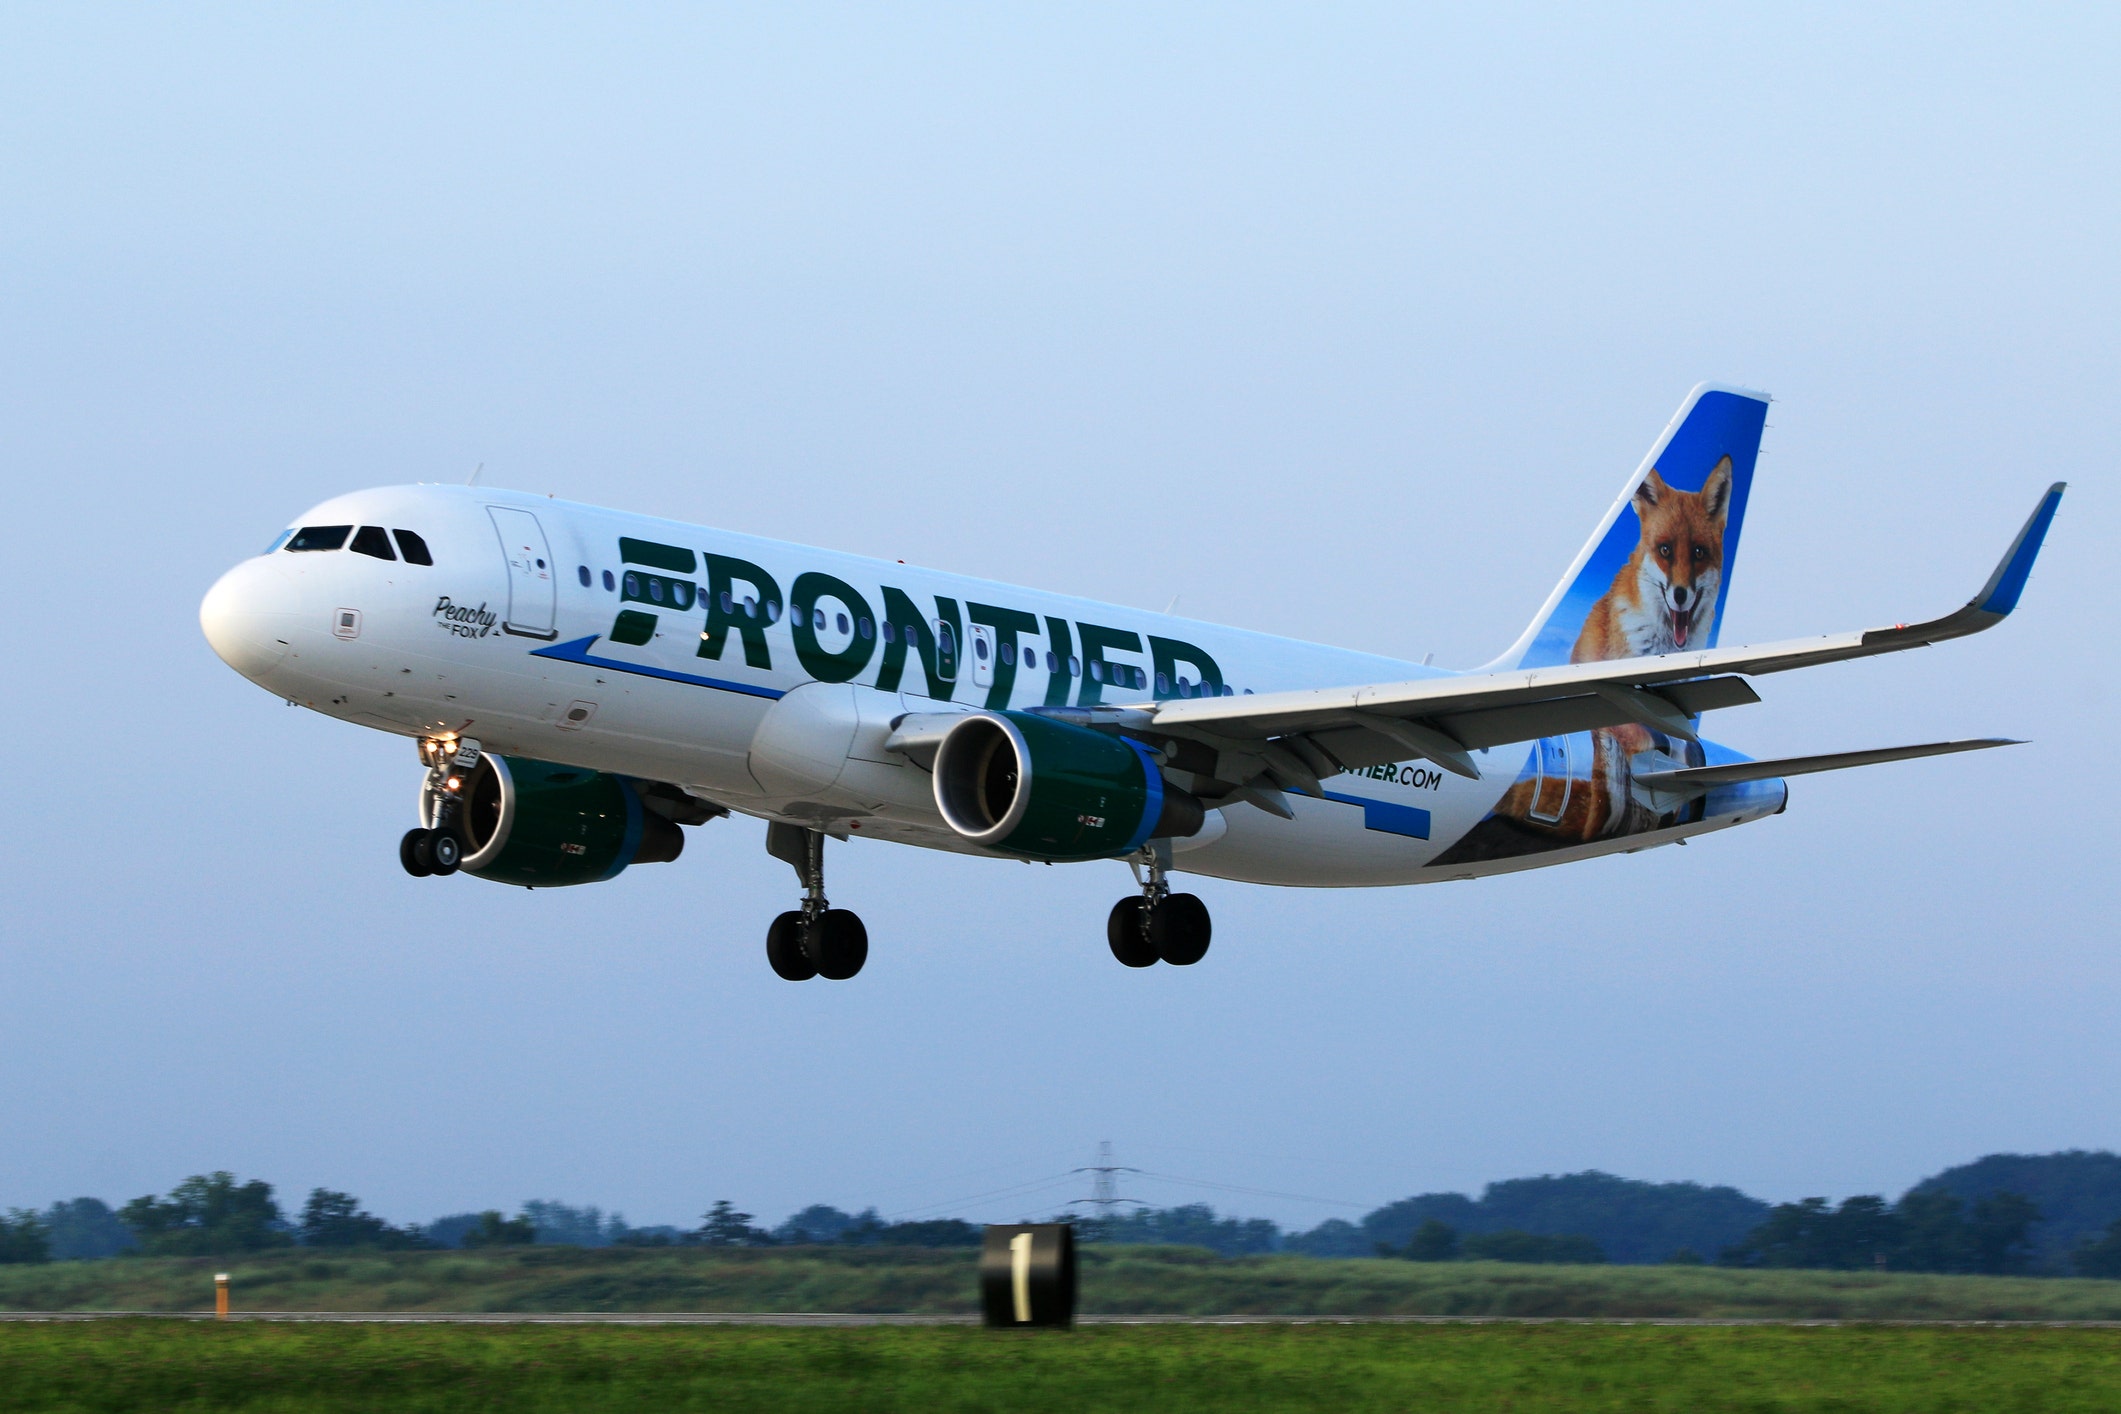 Frontier Airlines debuts aircraft with 30% lighter seats in bid to remain America's 'greenest' carrier